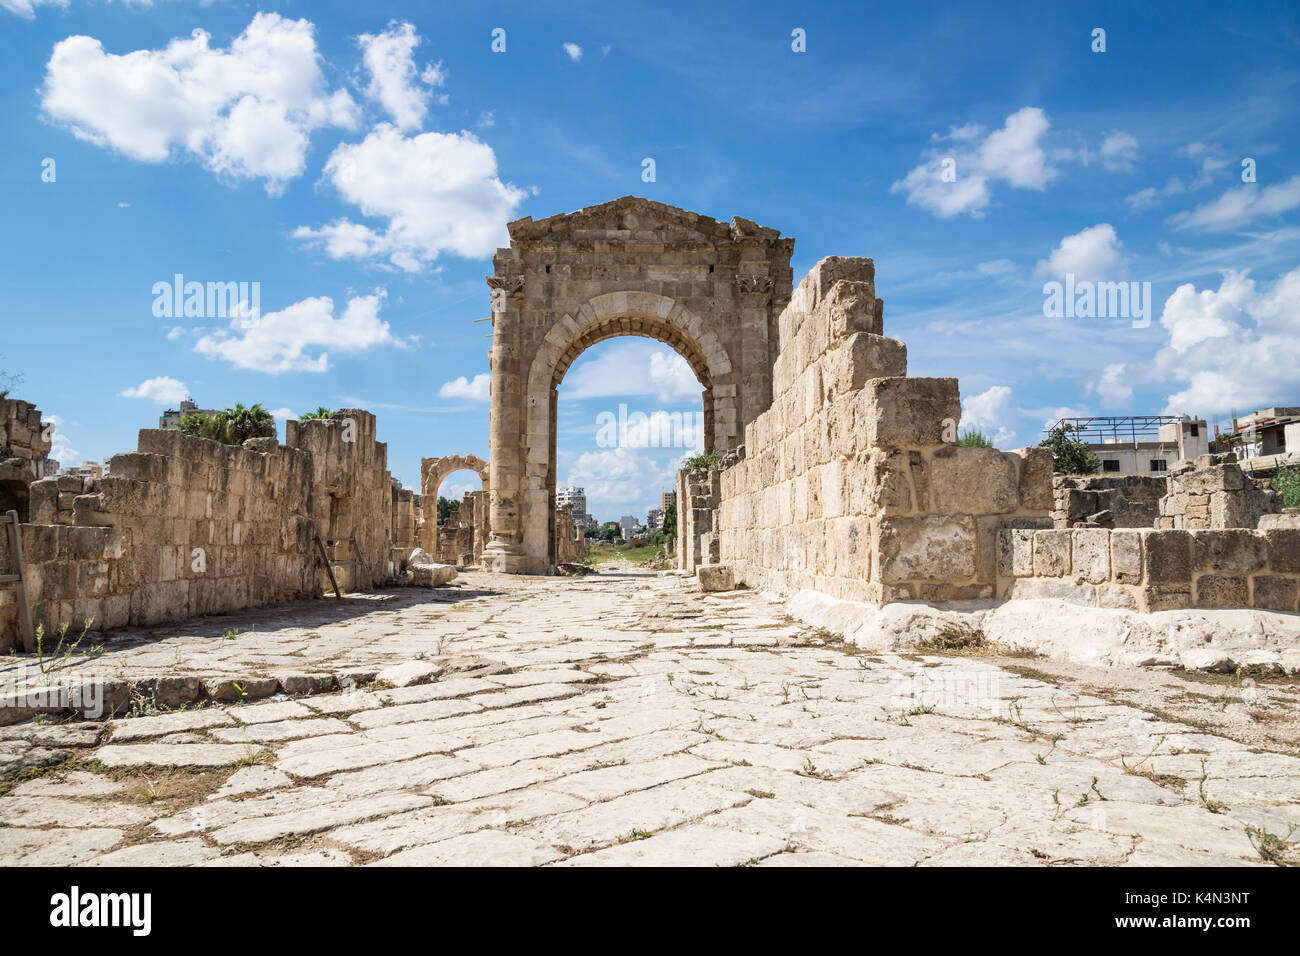 Al-Bass, Byzantine road with triumph arch in ruins of Tyre, Lebanon Stock Photo